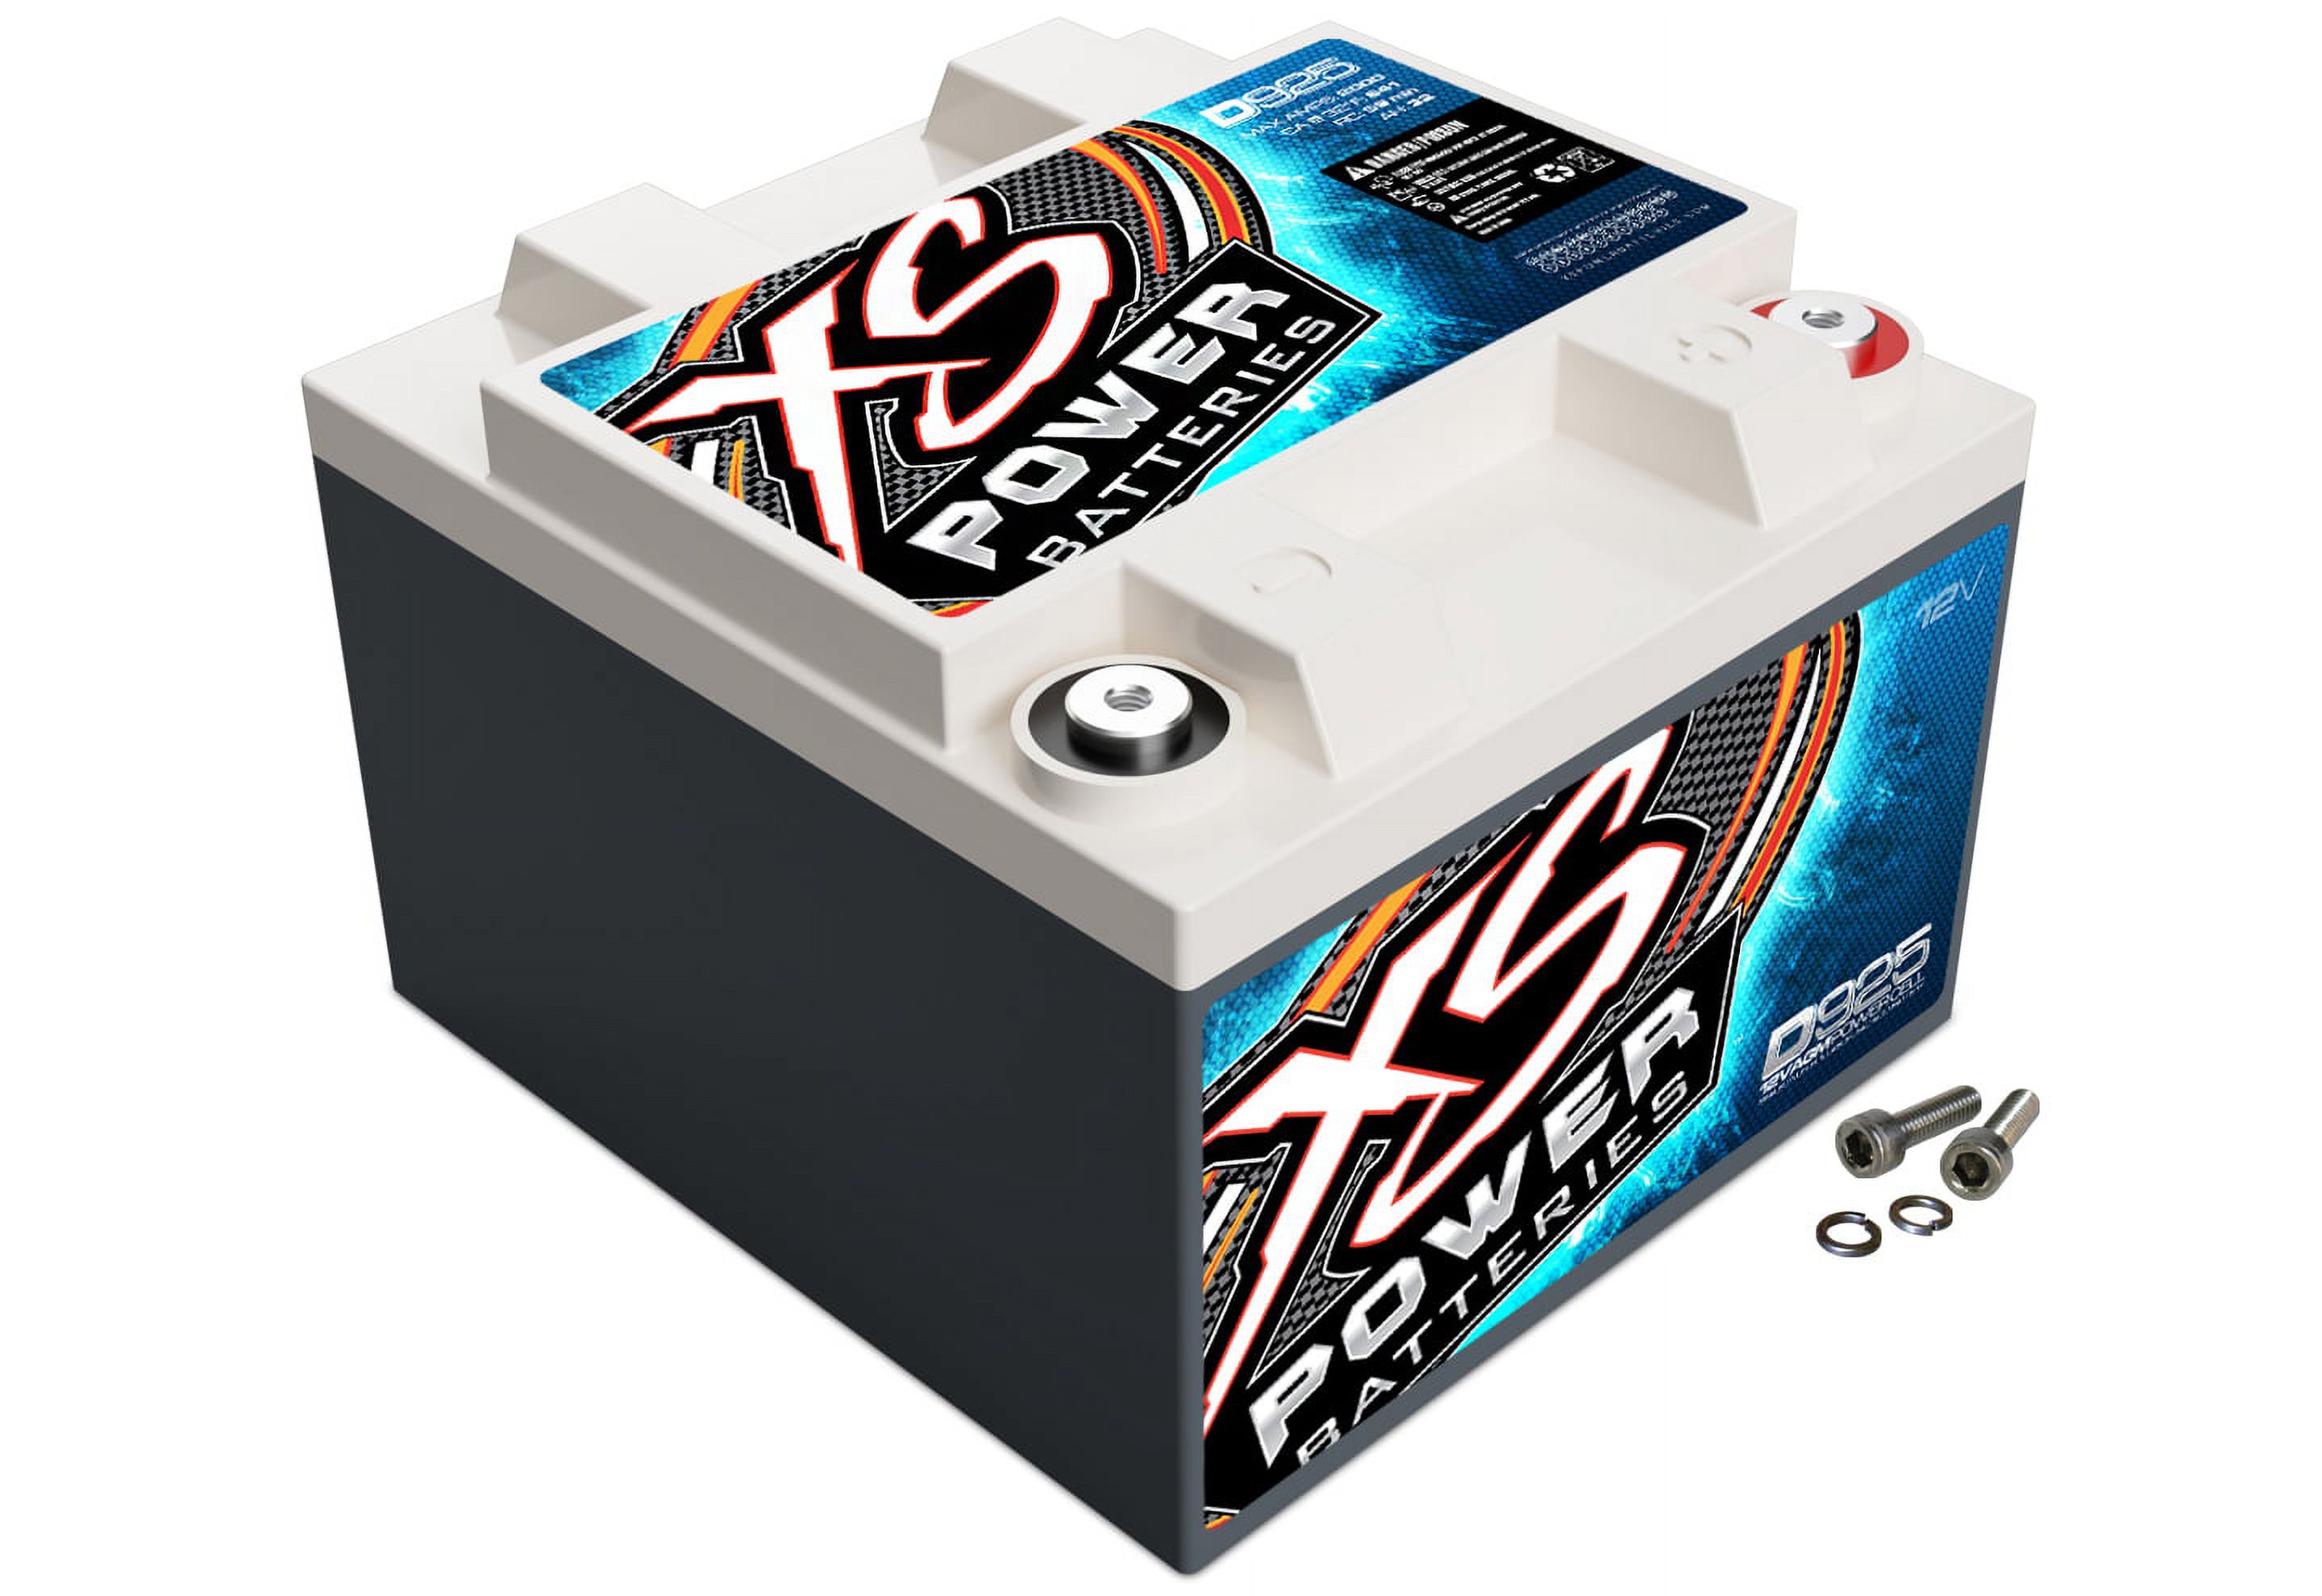 XS Power Battery D925 XS Power AGM Battery 12 Volt 641A CA - image 1 of 5